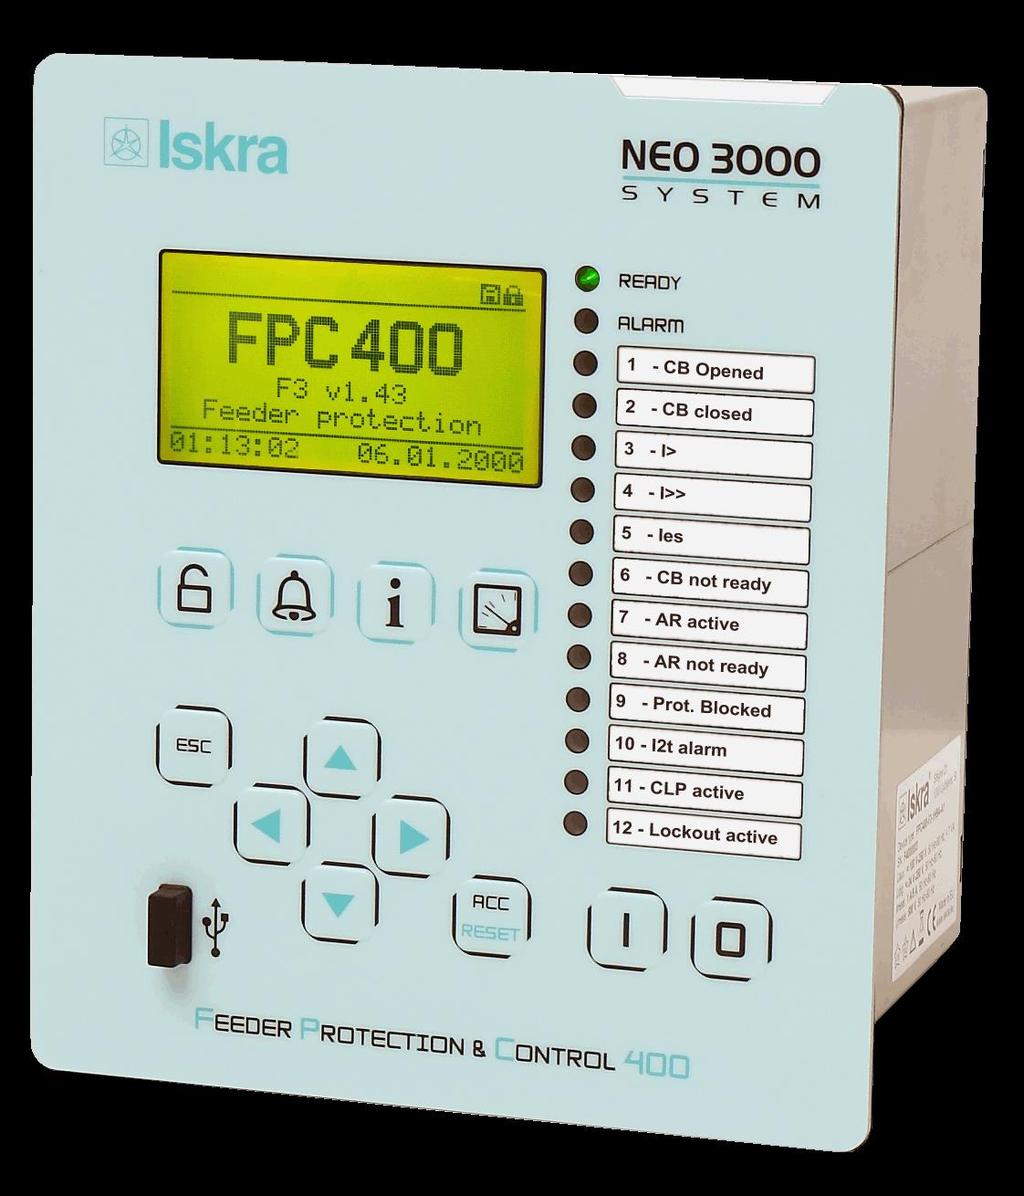 Introduction 1.1 Presentation FPC 400 is a family of current and voltage numerical protection relays with easy to use interface meant for variety of solutions in industry and power distribution.